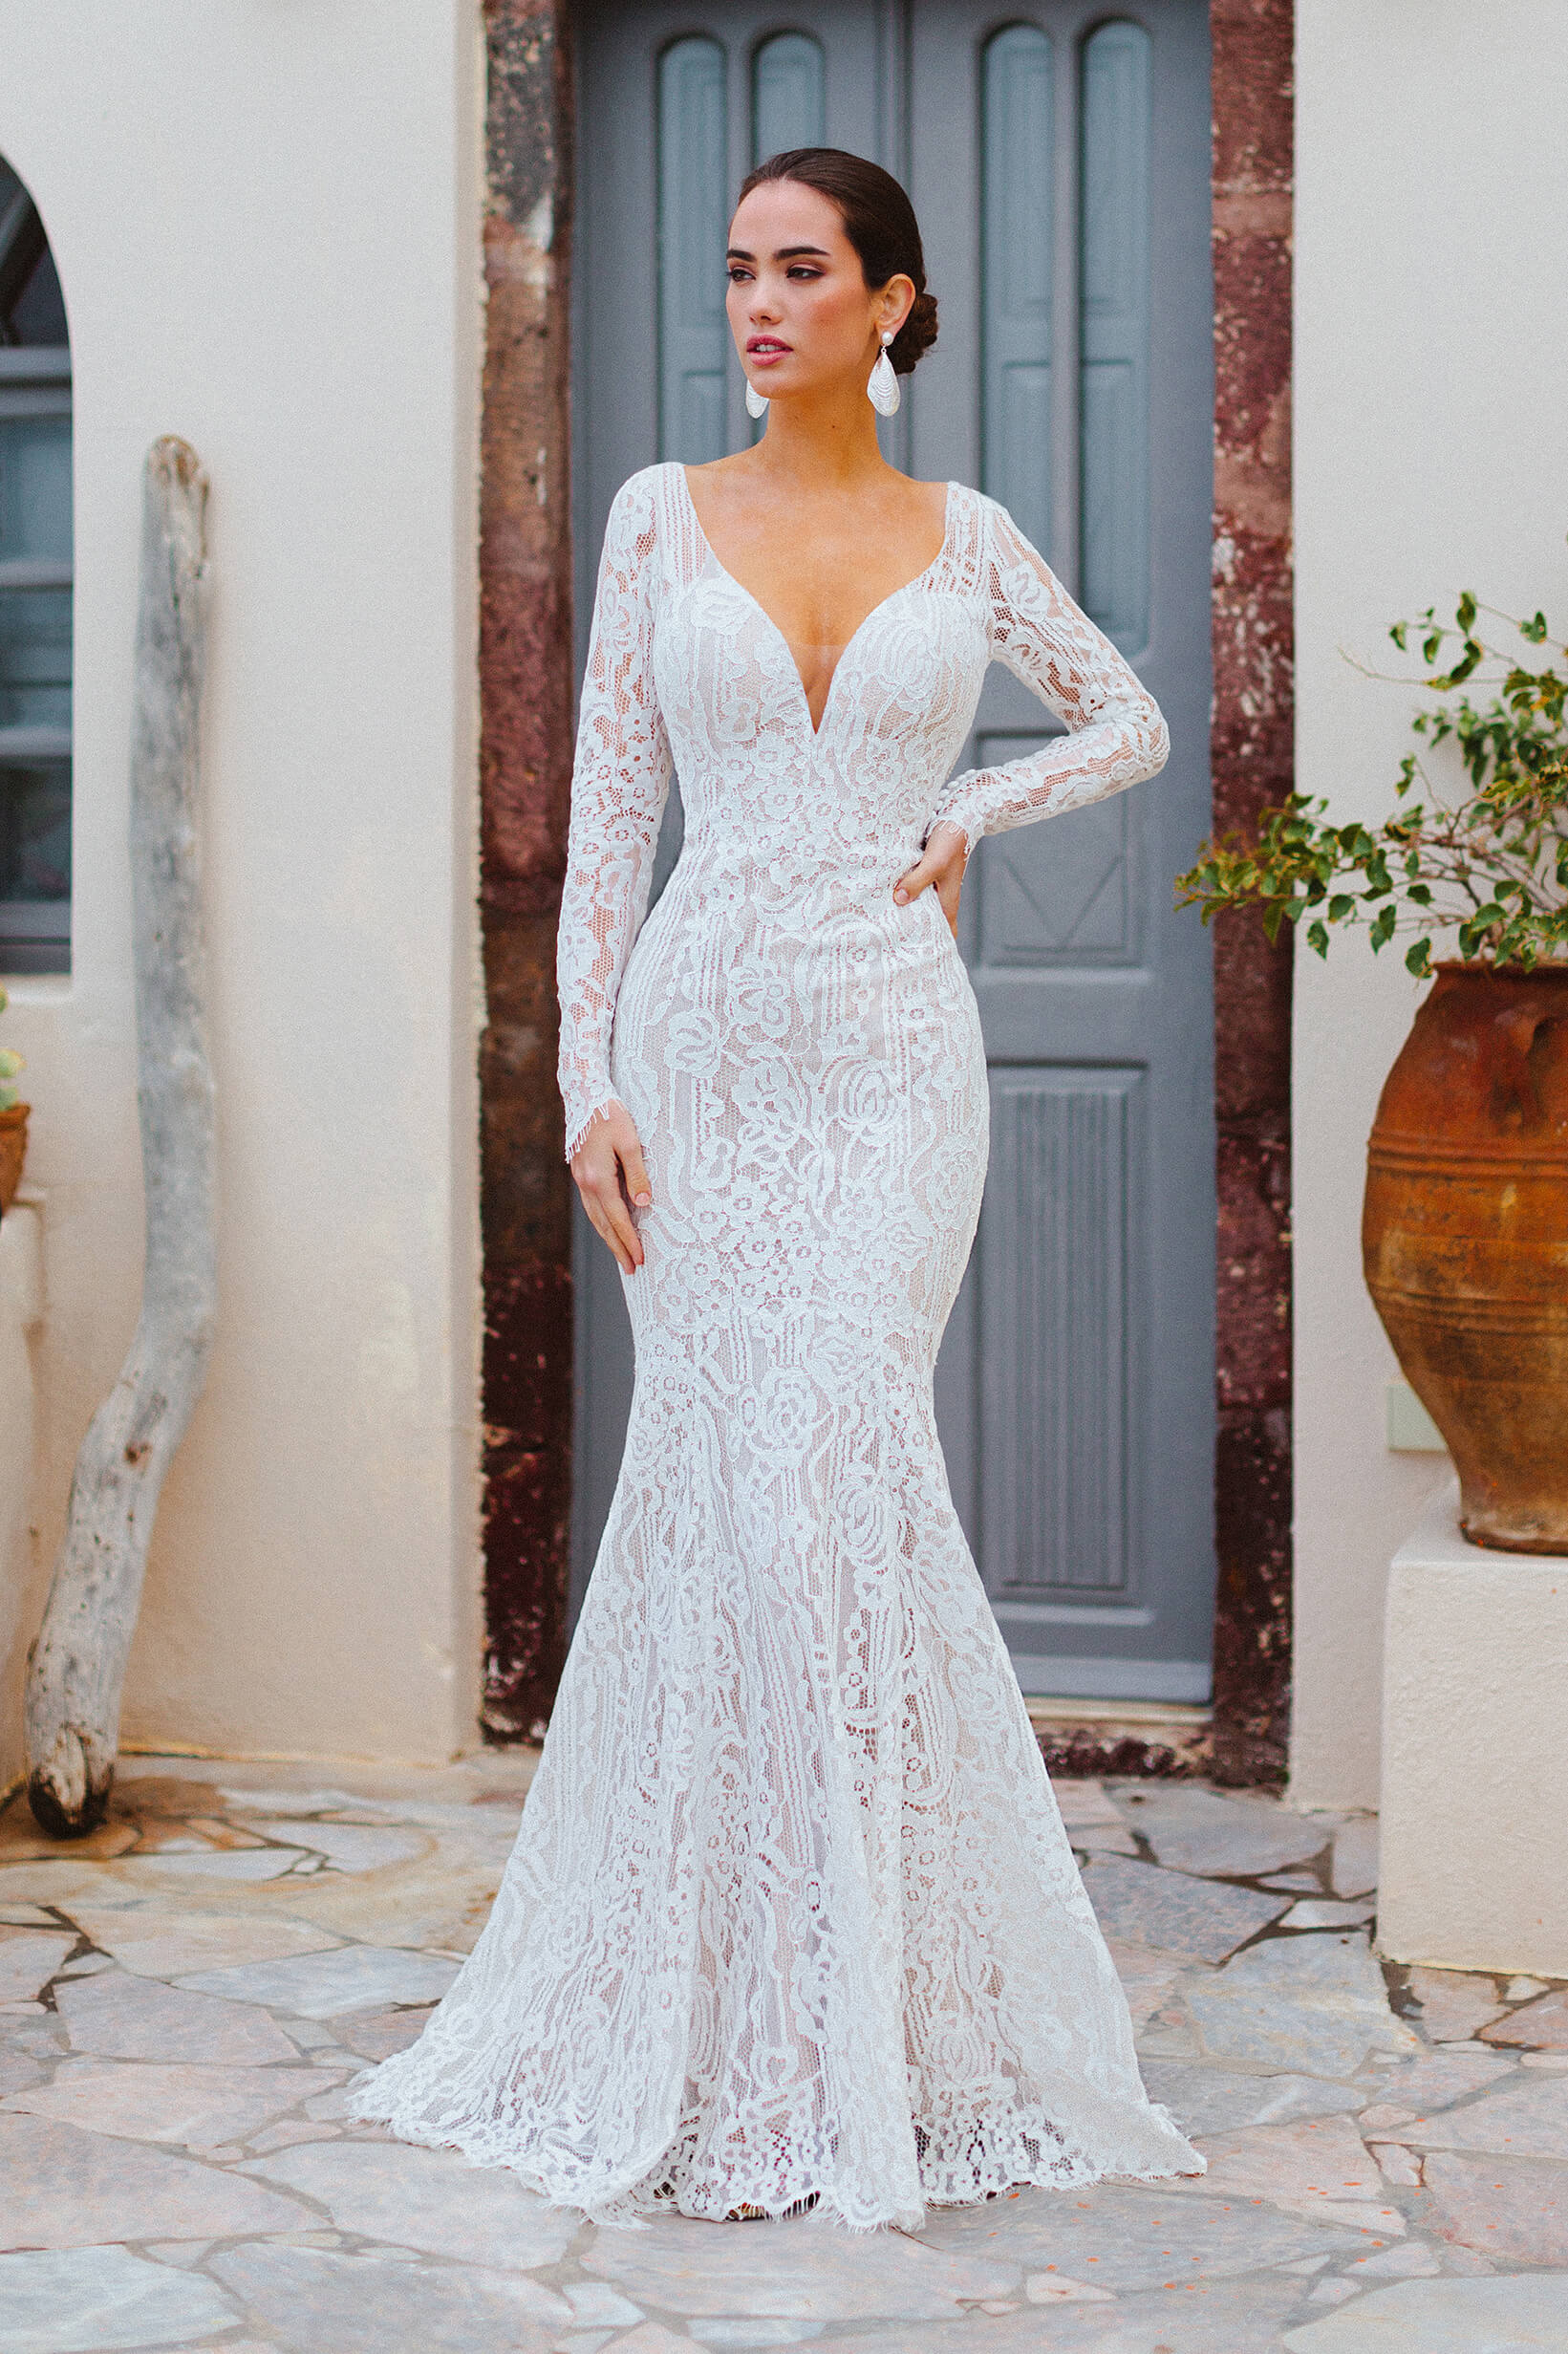 F166 Valentina - A Brides of sydney Exclusive - Available in